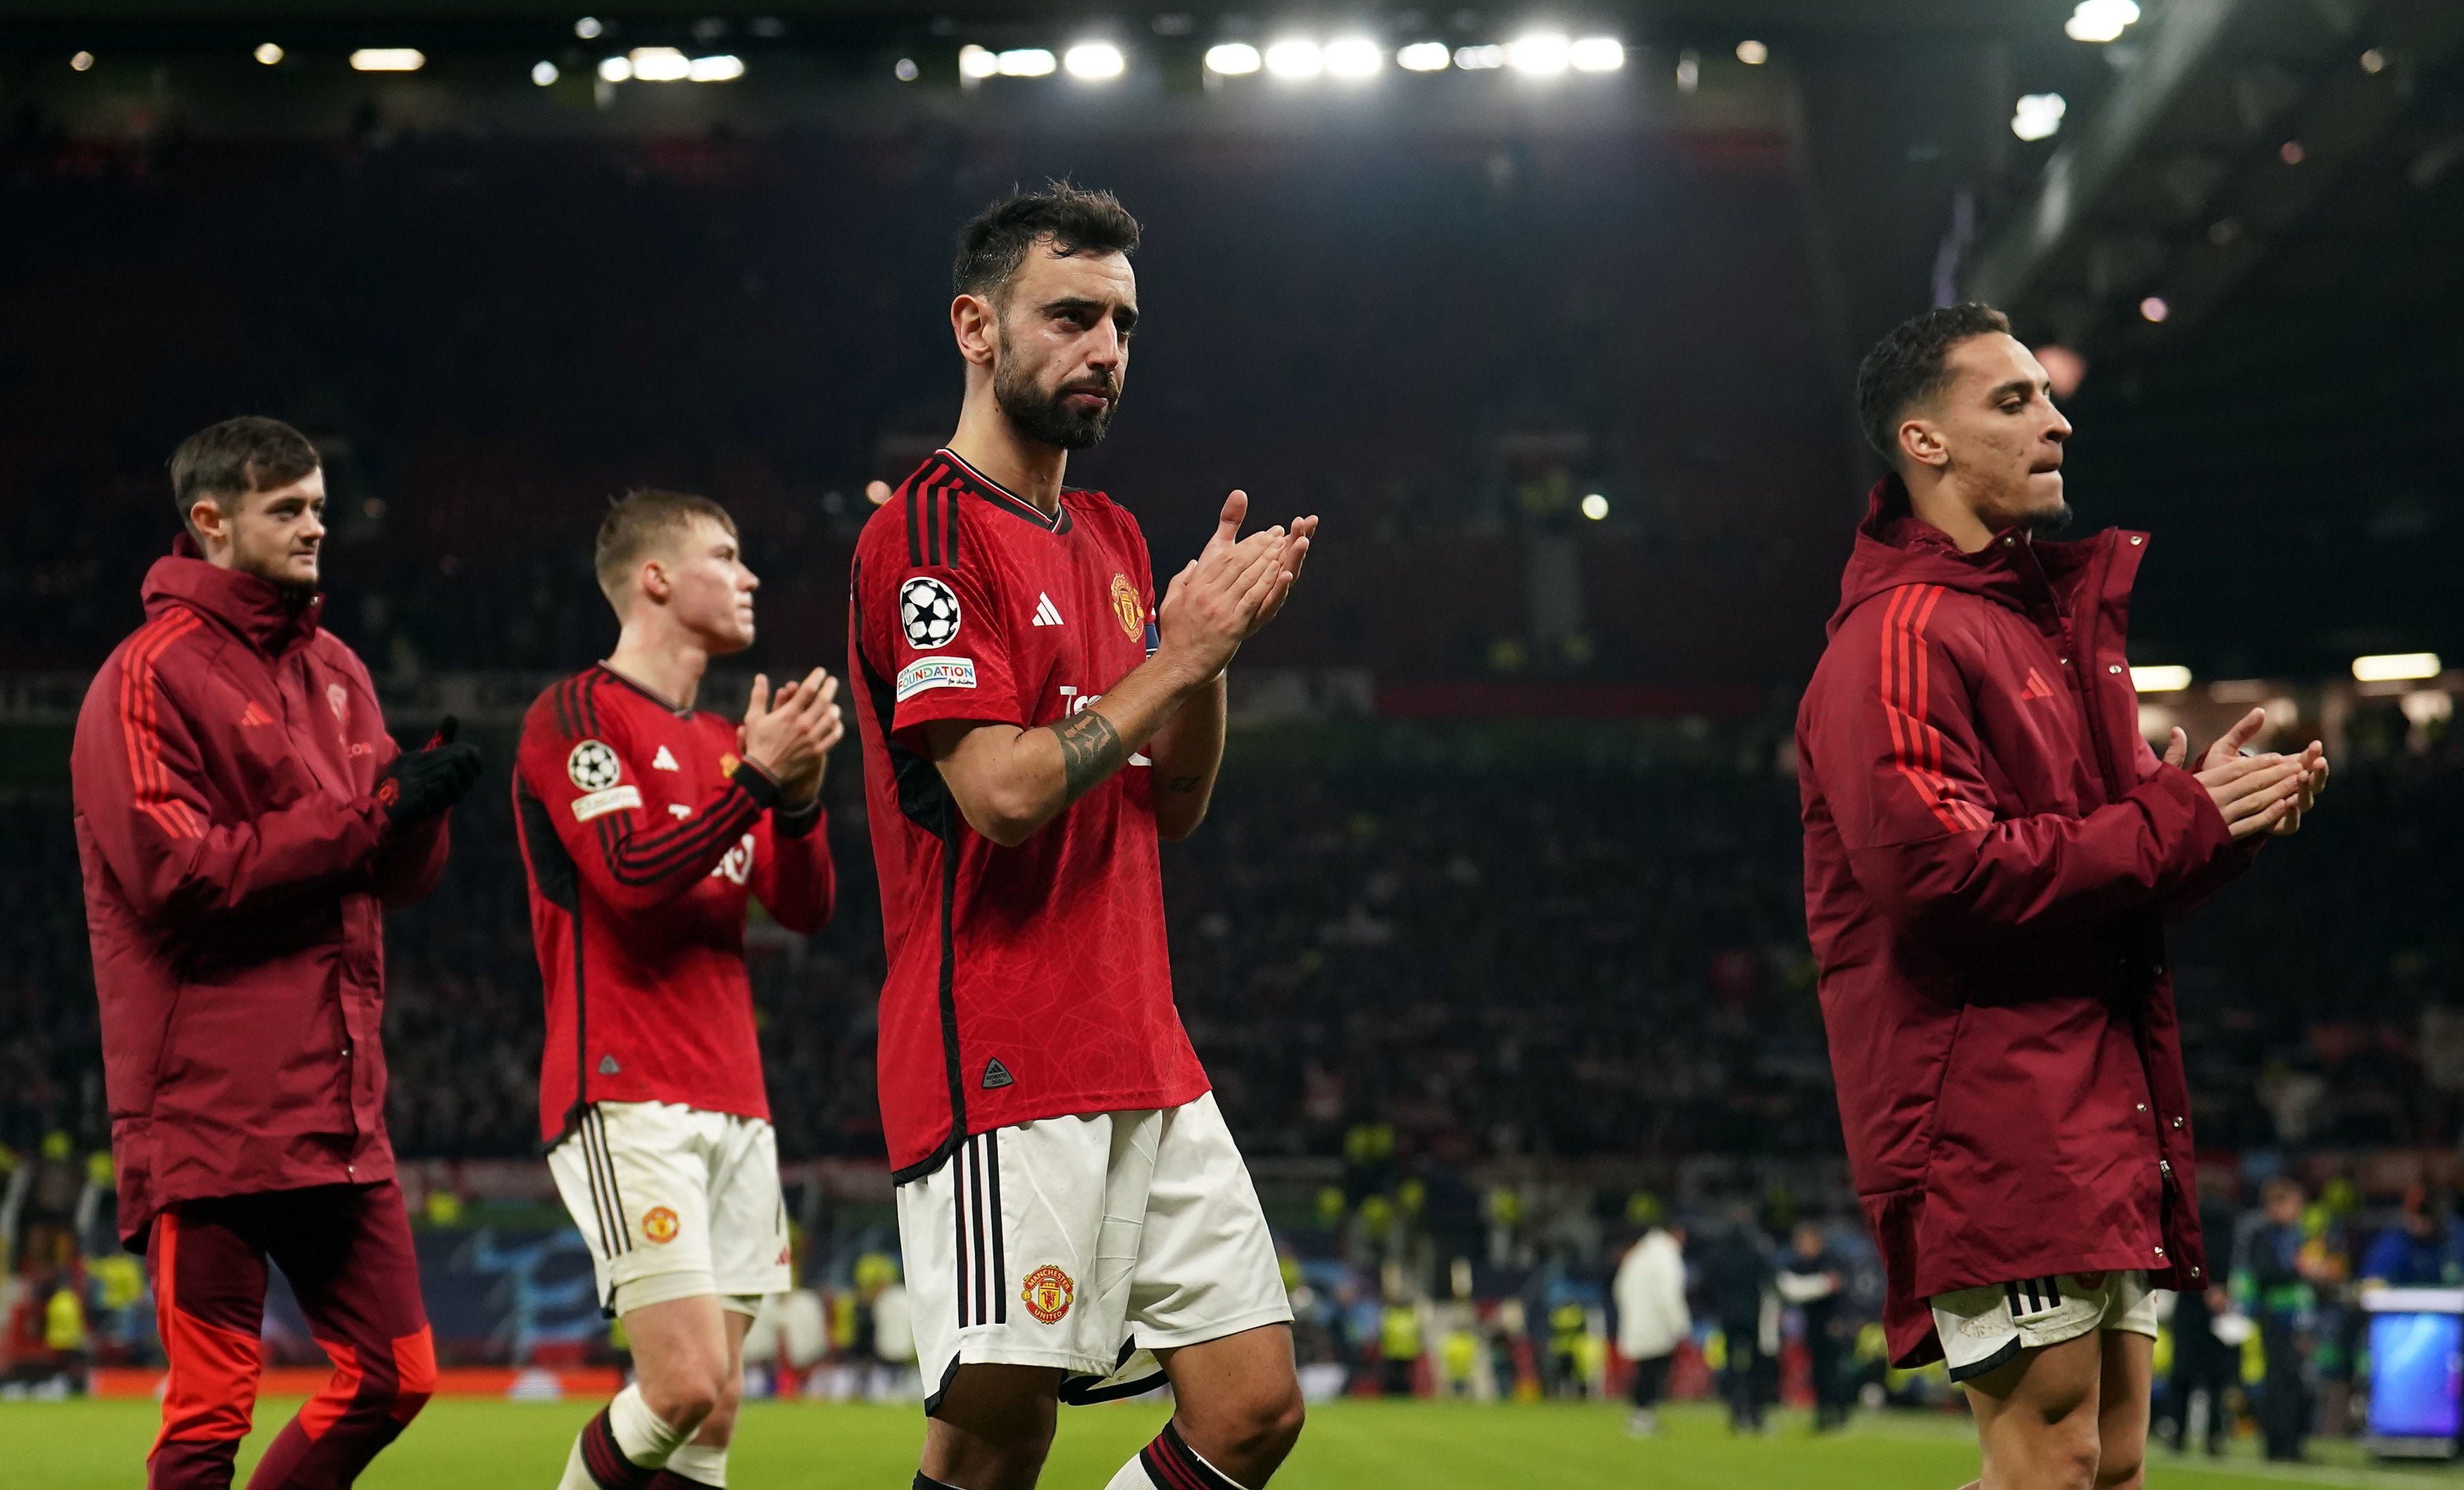 Manchester United’s defeat means they miss out on a spot in the Europa League